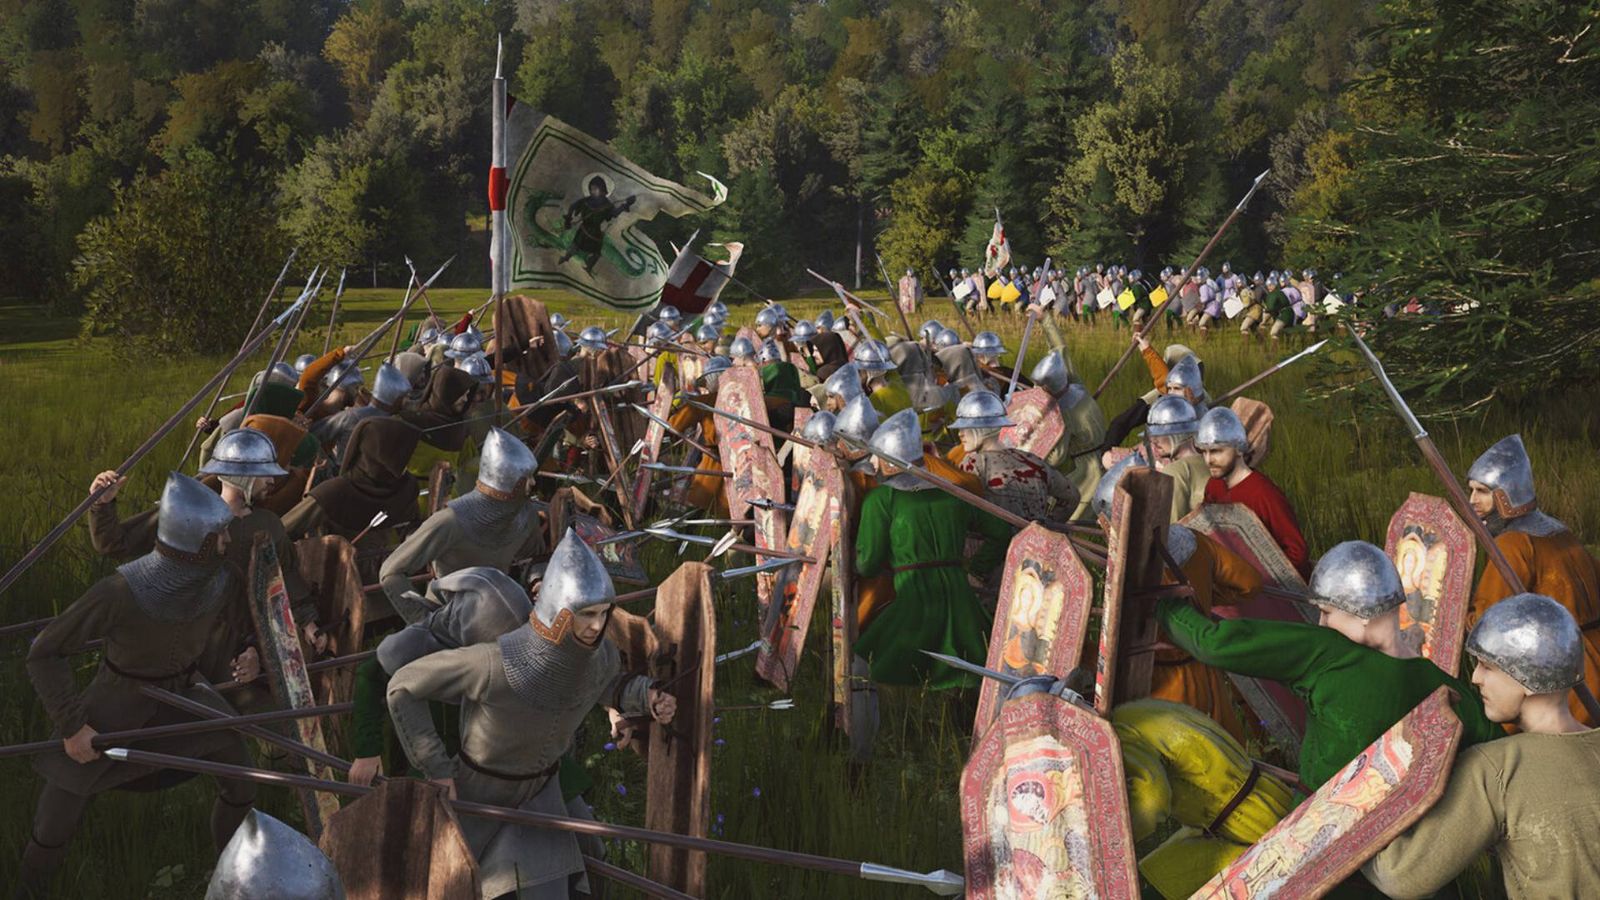 Manor Lords spears: Two armies clashing in a field, both armed with spears and shields.